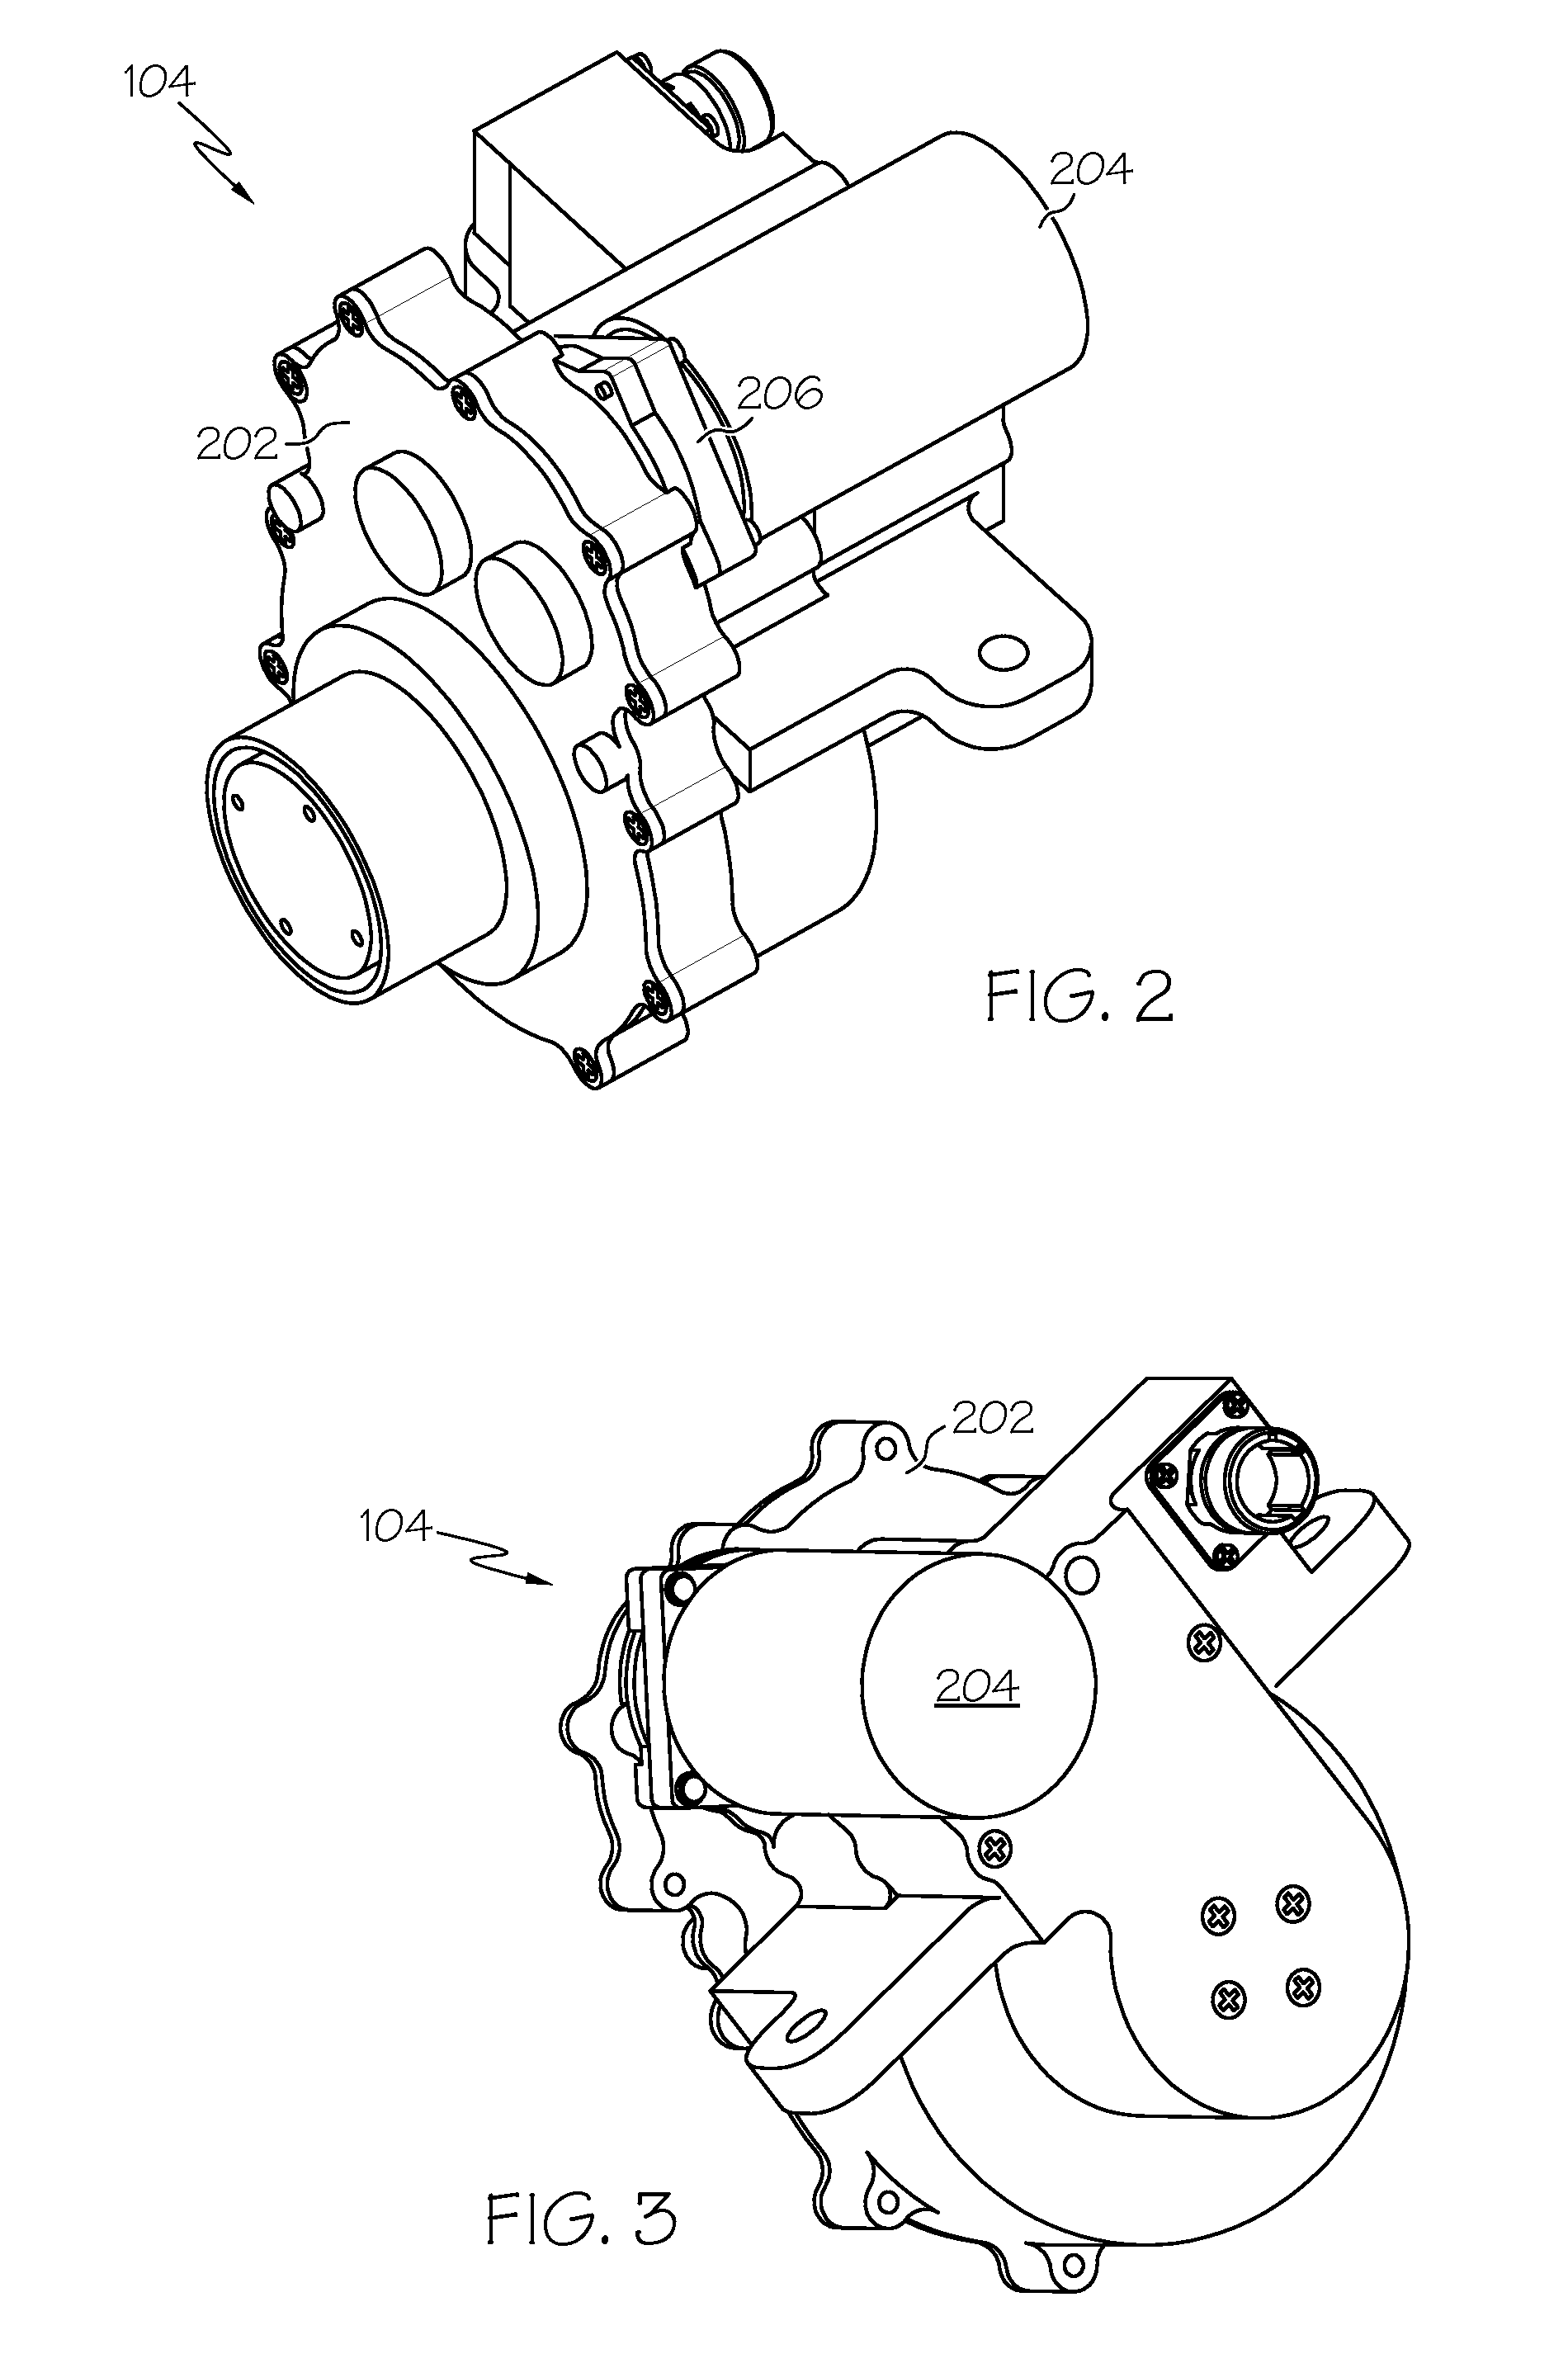 Brake actuator assembly with line replaceable motor features